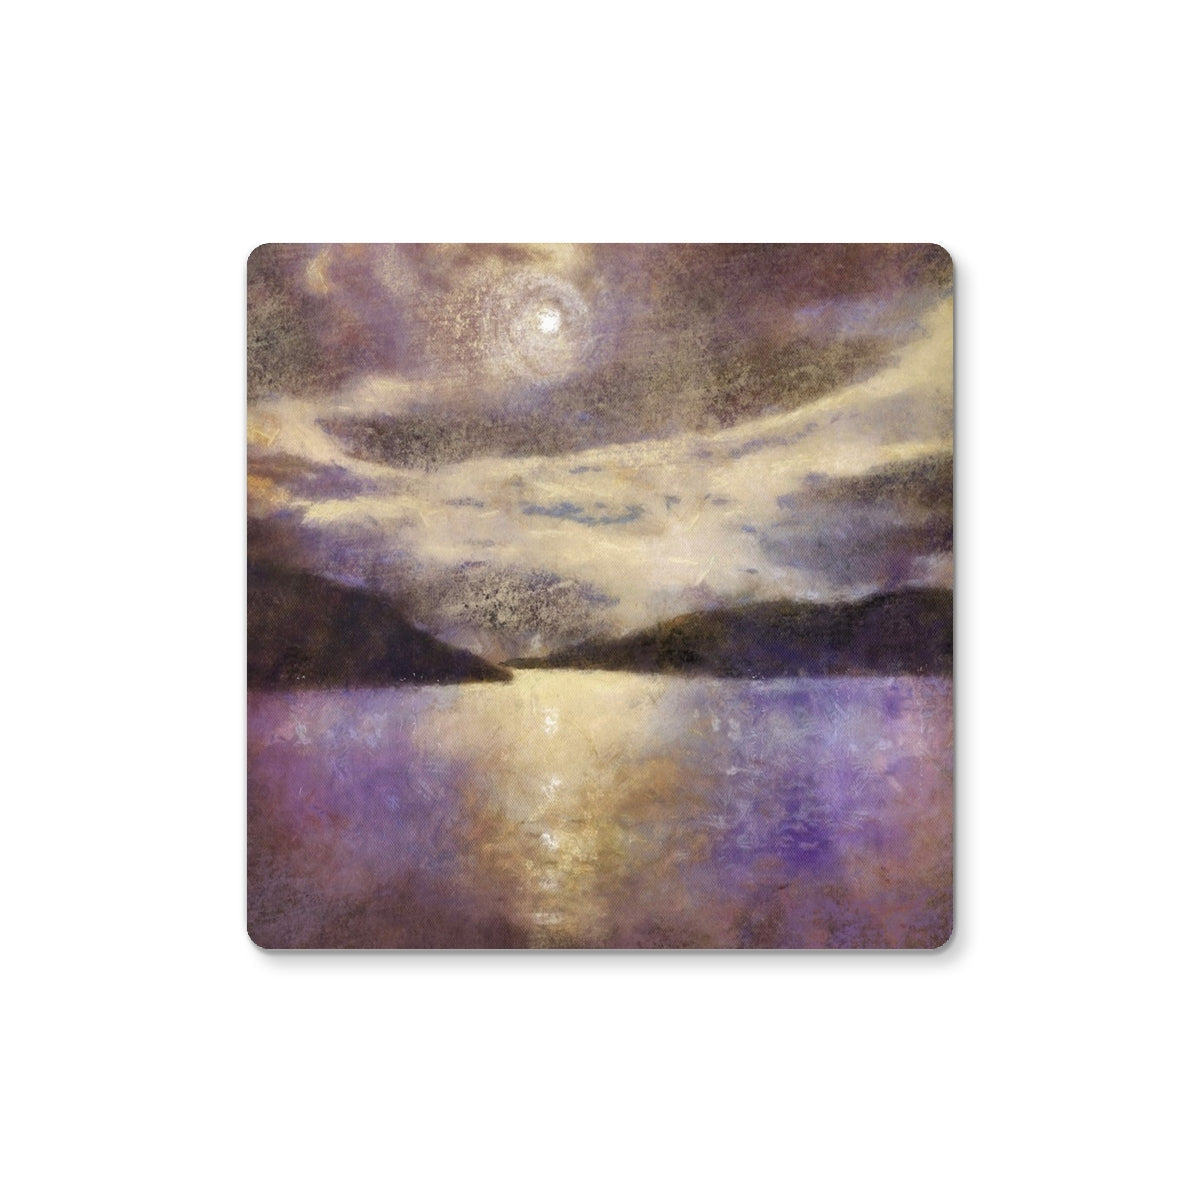 Moonlight Meets Lewis & Harris Art Gifts Coaster-Coasters-Hebridean Islands Art Gallery-6 Coasters-Paintings, Prints, Homeware, Art Gifts From Scotland By Scottish Artist Kevin Hunter